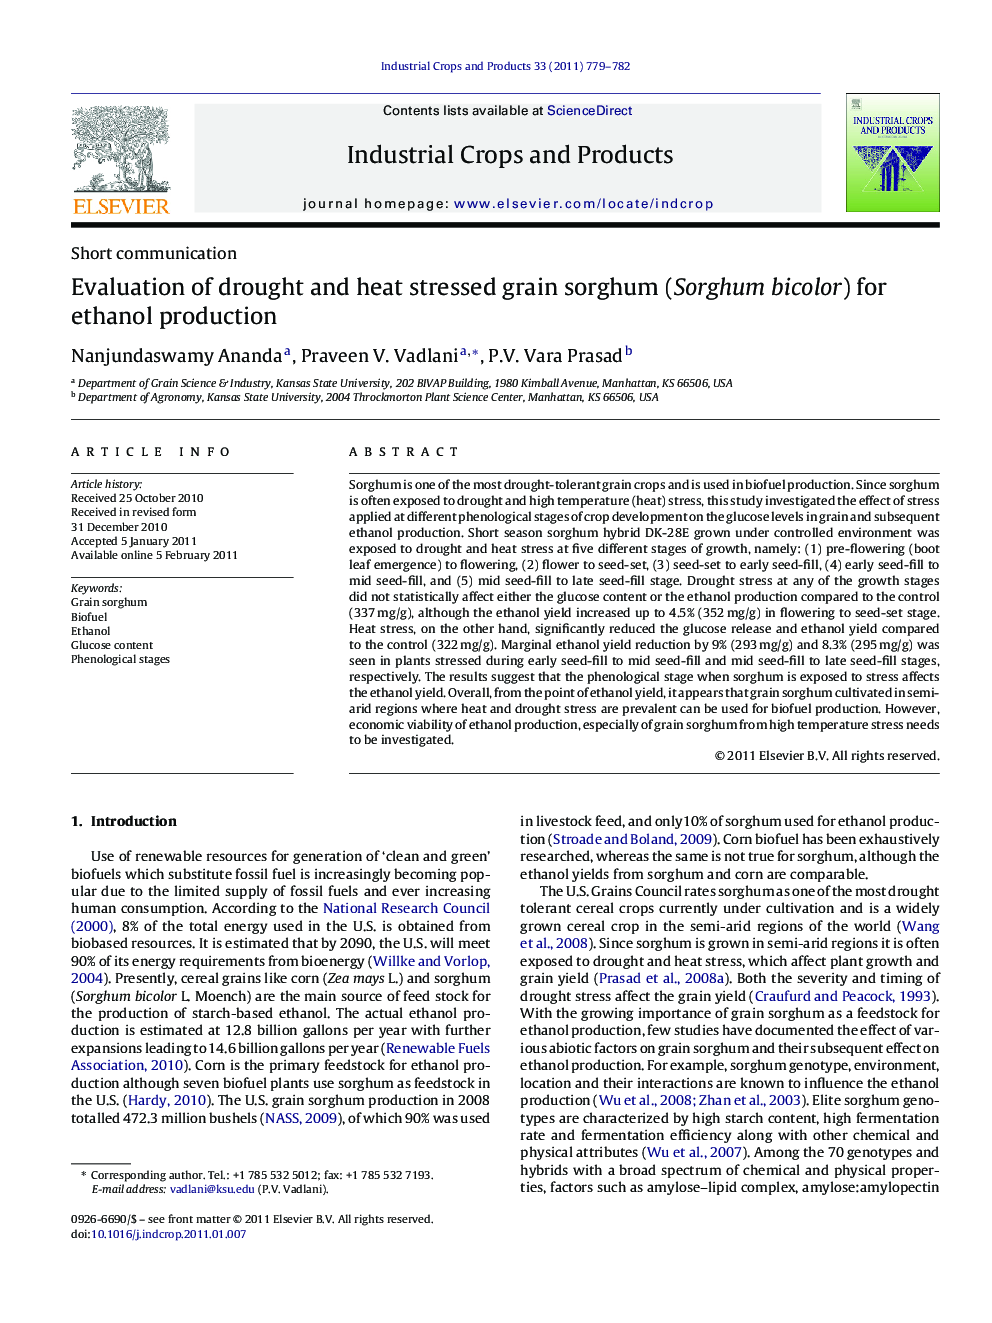 Evaluation of drought and heat stressed grain sorghum (Sorghum bicolor) for ethanol production